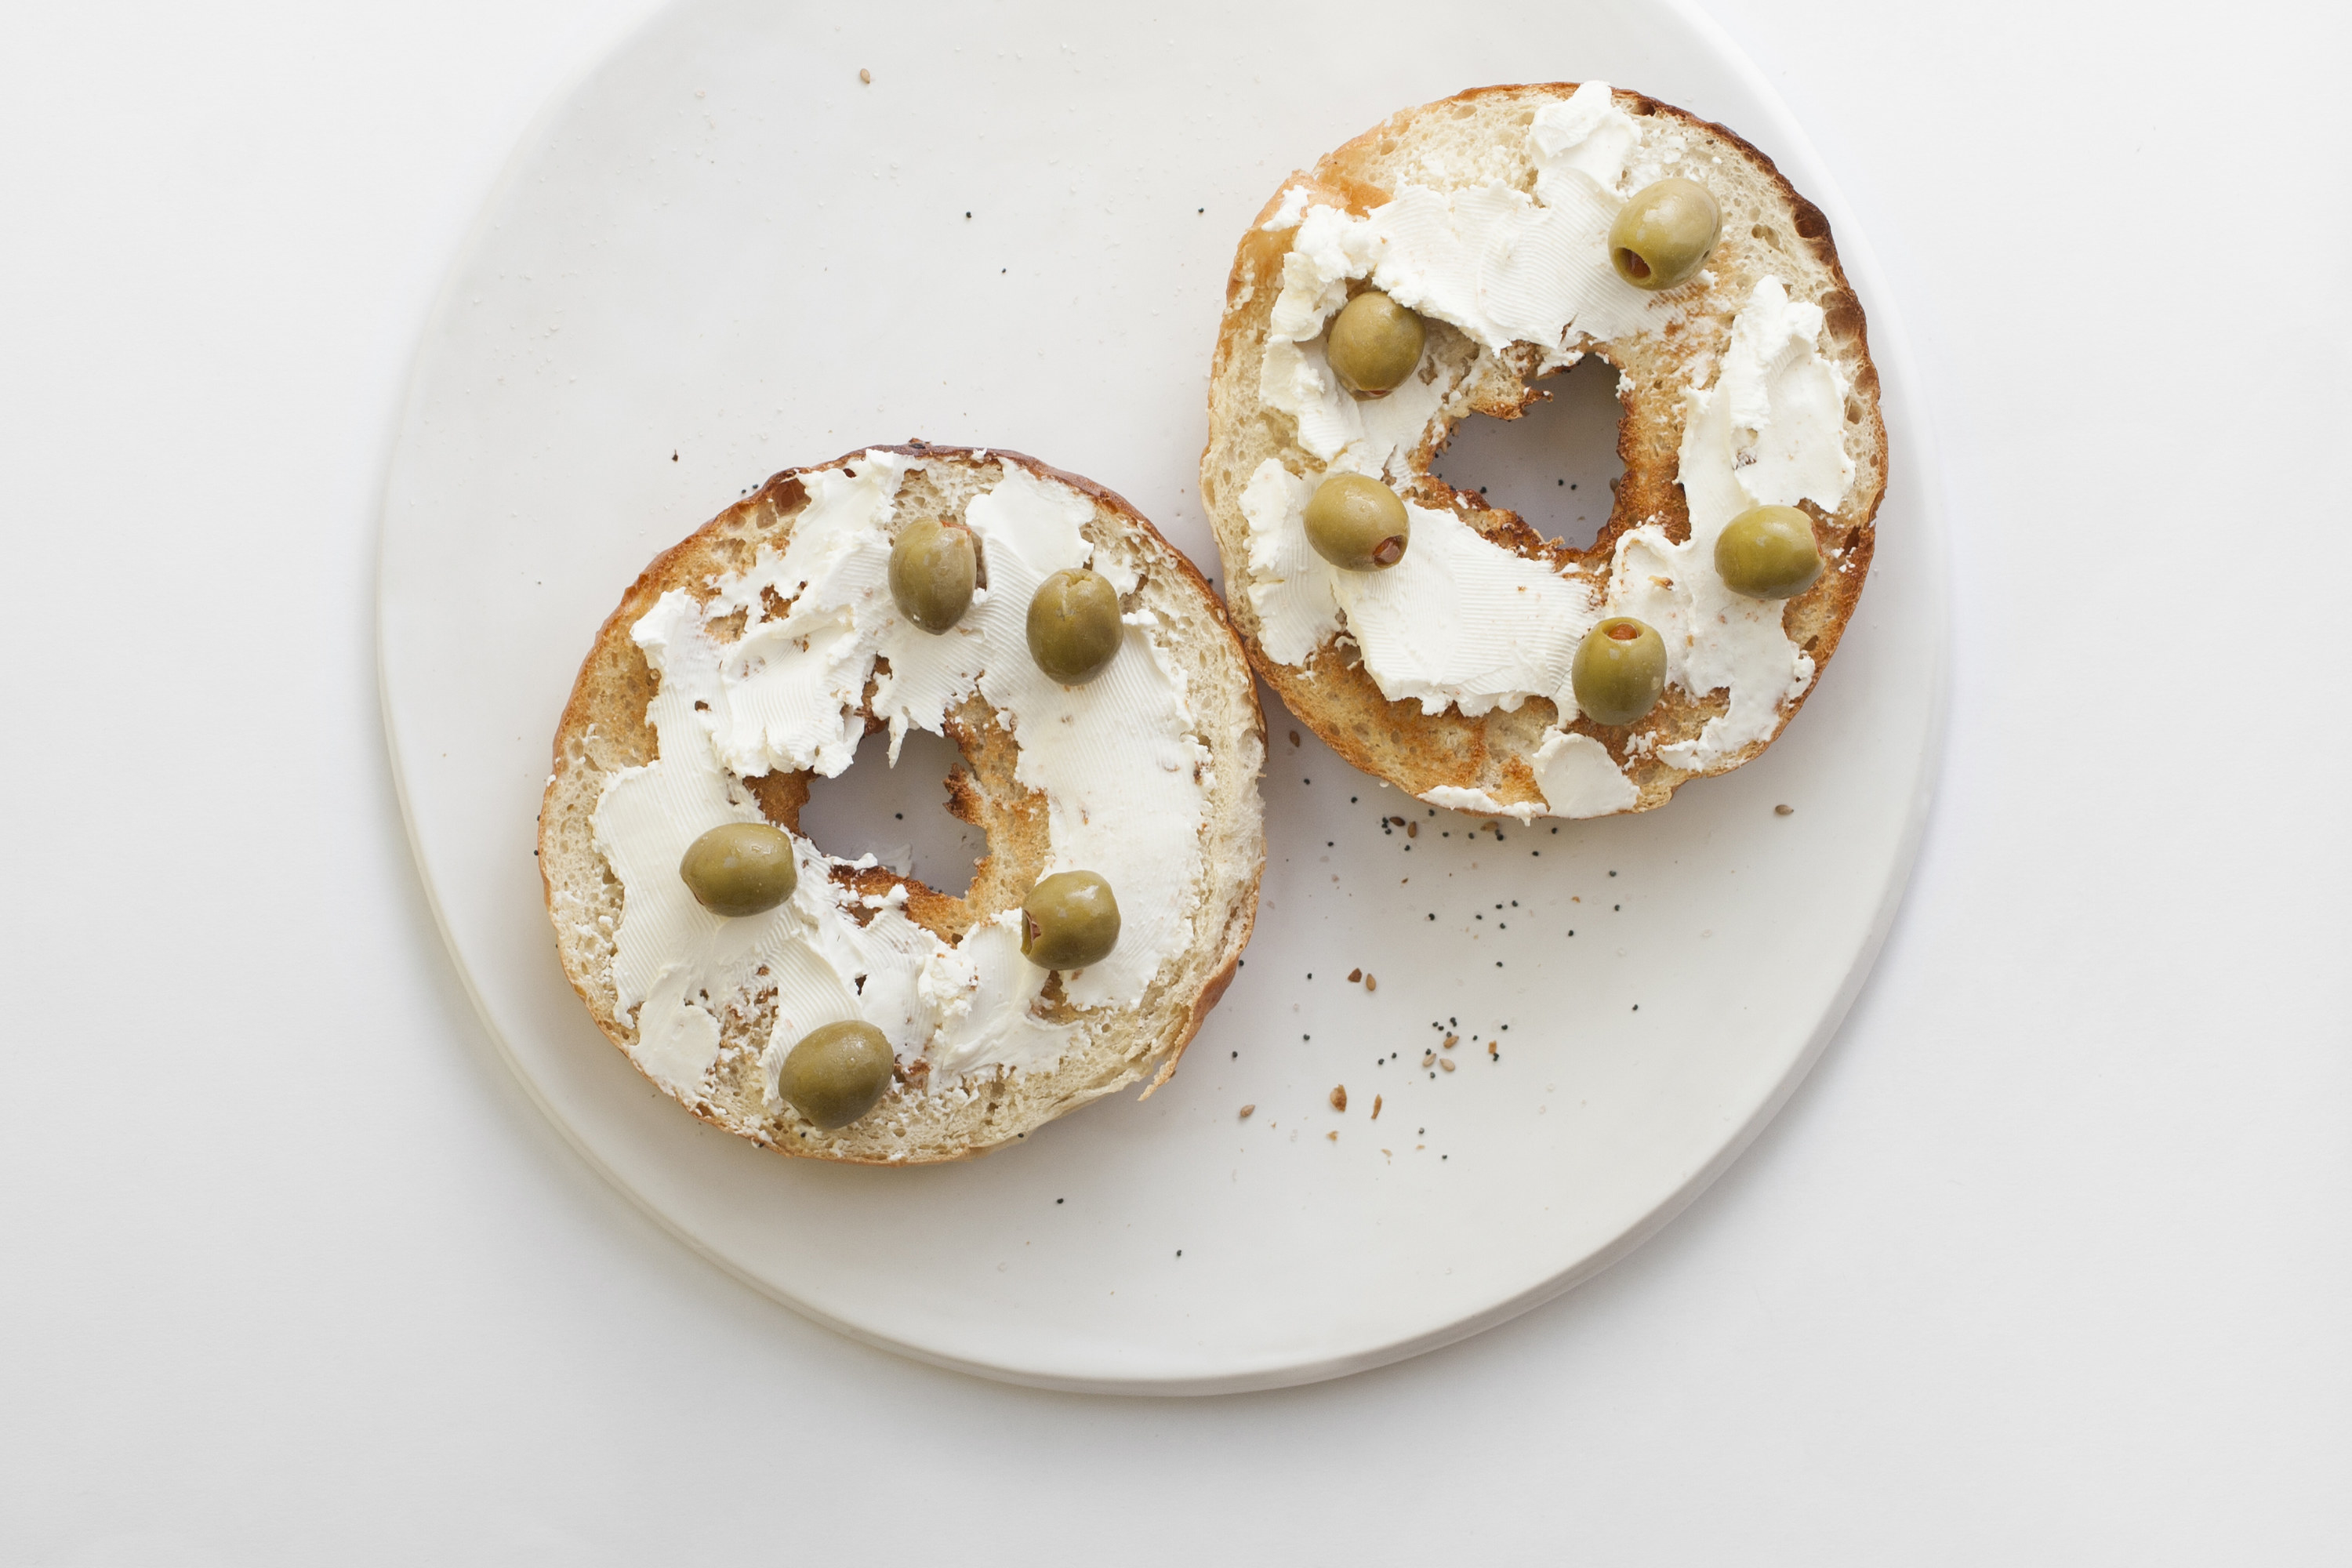 Green olives and cream cheese on a bagel.